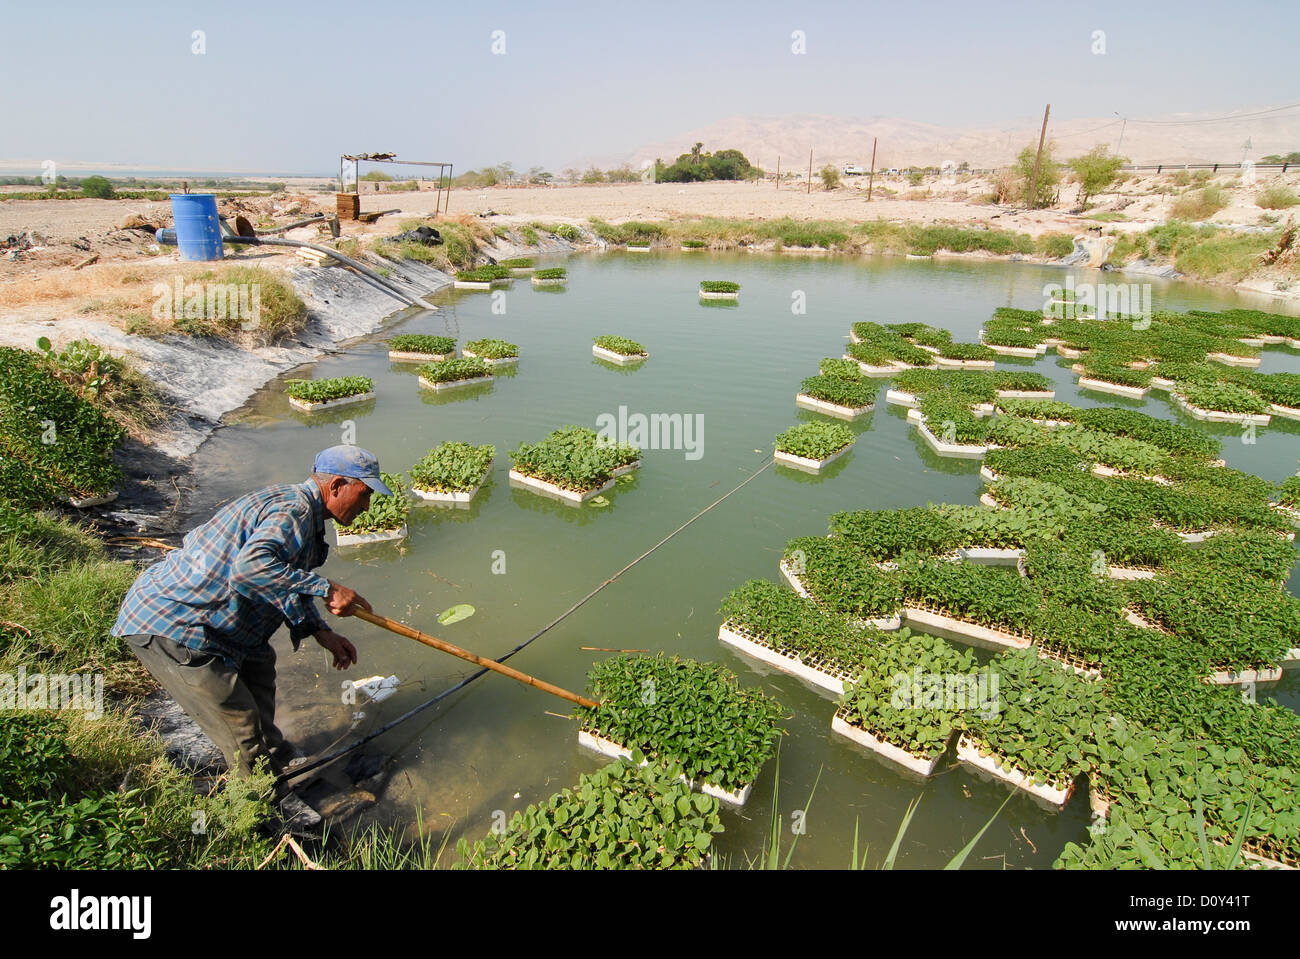 jordan-water-shortage-and-agriculture-in-the-jordan-valley-stock-photo